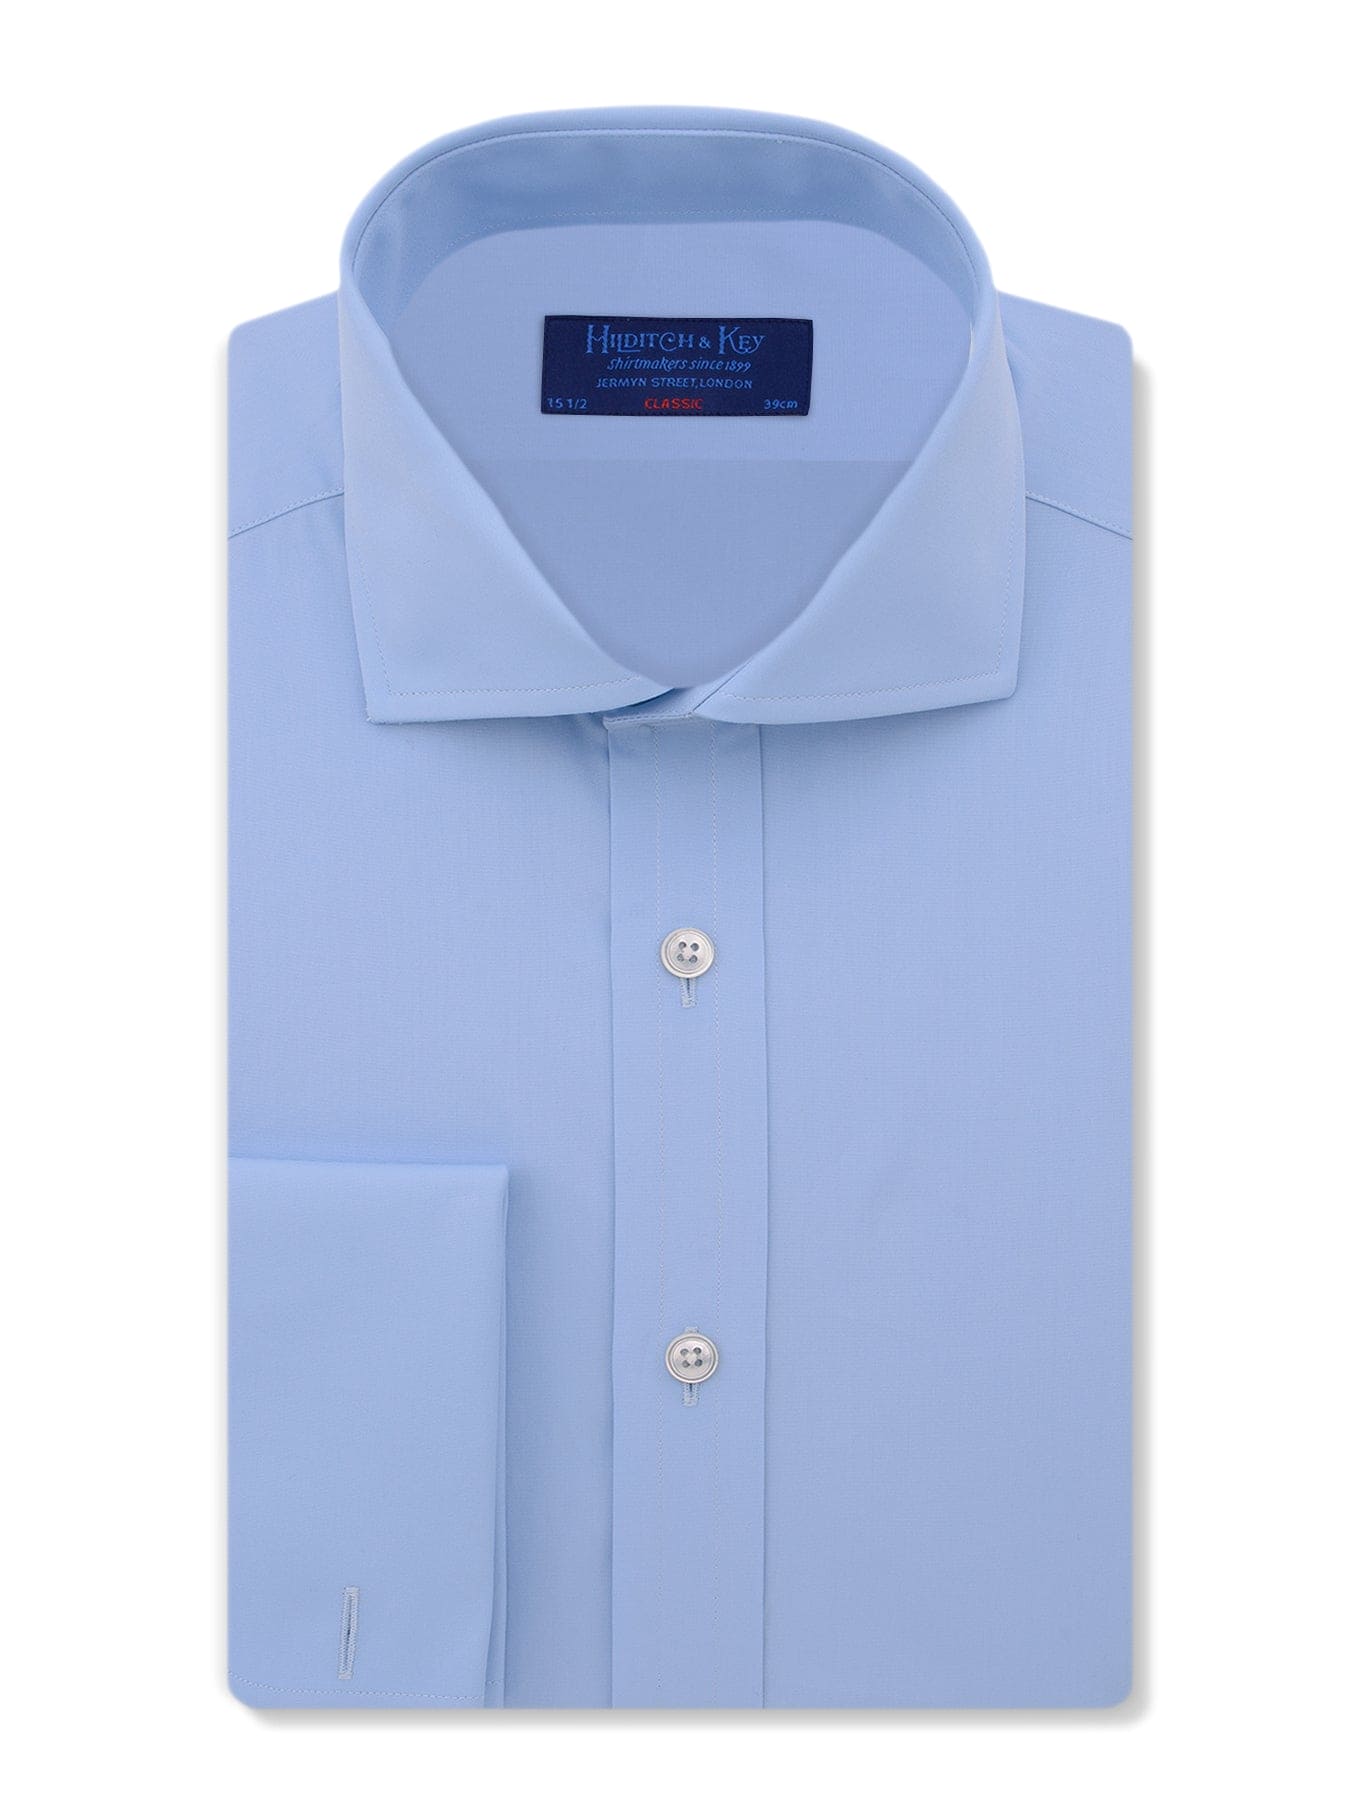 Classic Fit, Cutaway Collar, Double Cuff Shirt in a Plain Ice Blue Cotton